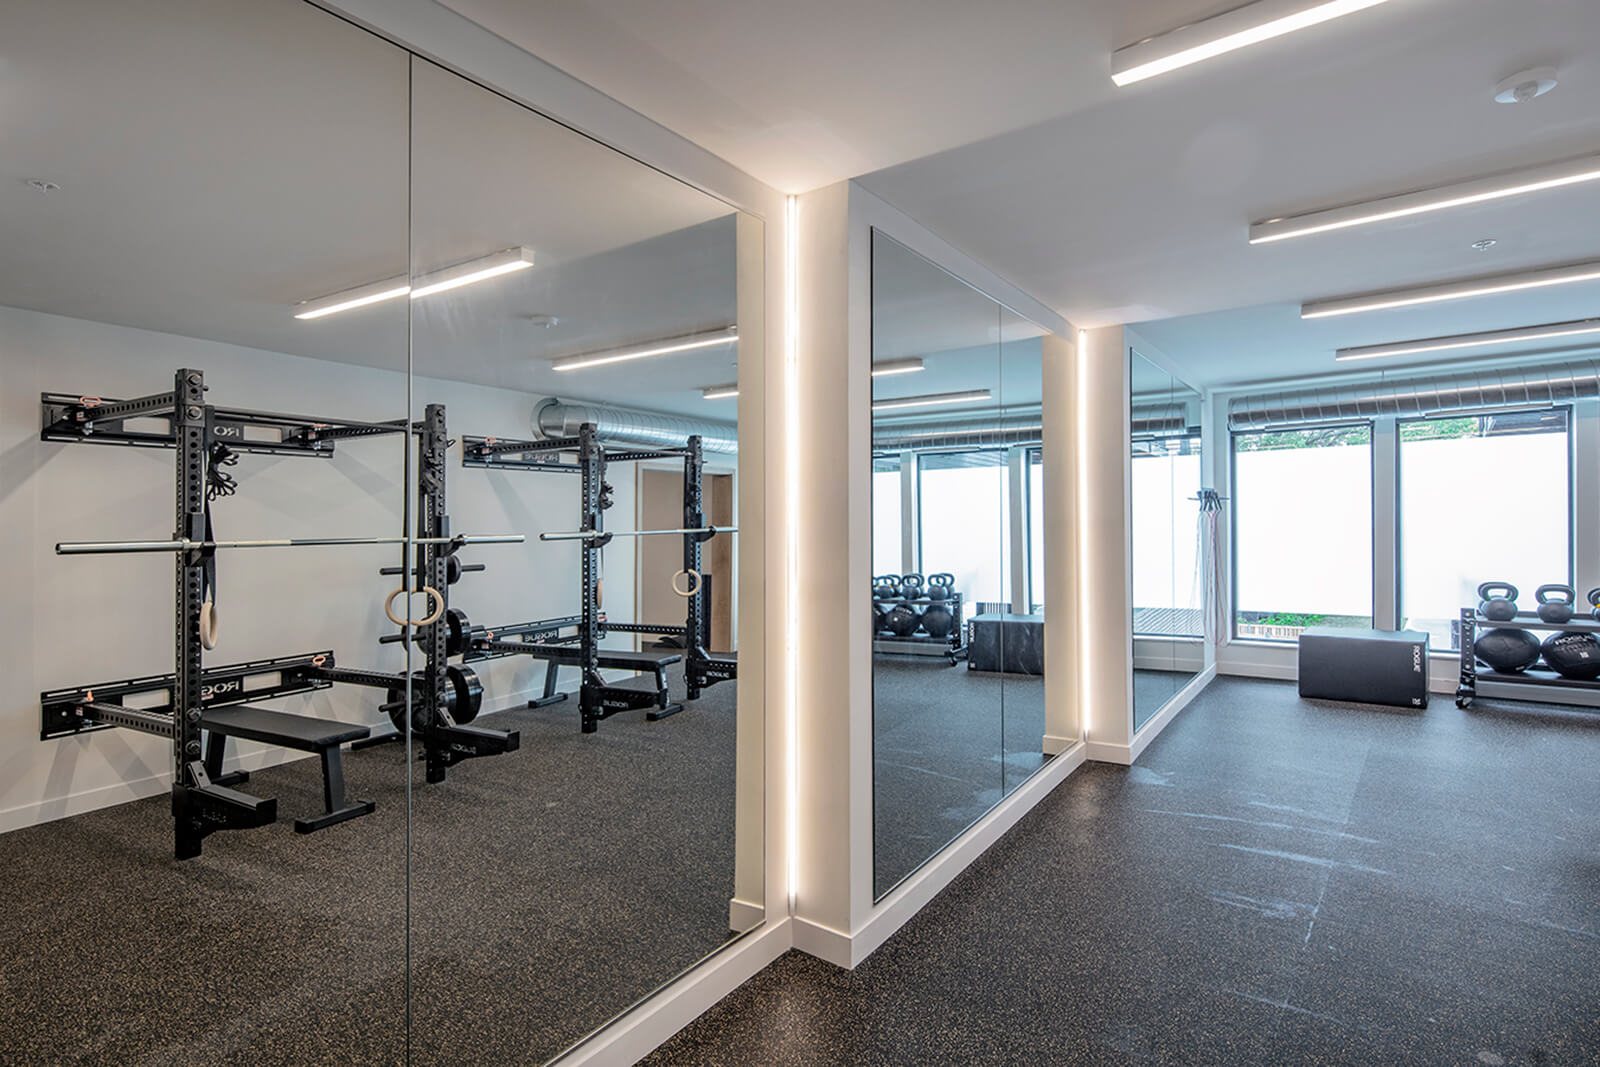 floor to ceiling mirrors in the wakpada minneapolis fitness room reflecting the rogue fitness squat racks